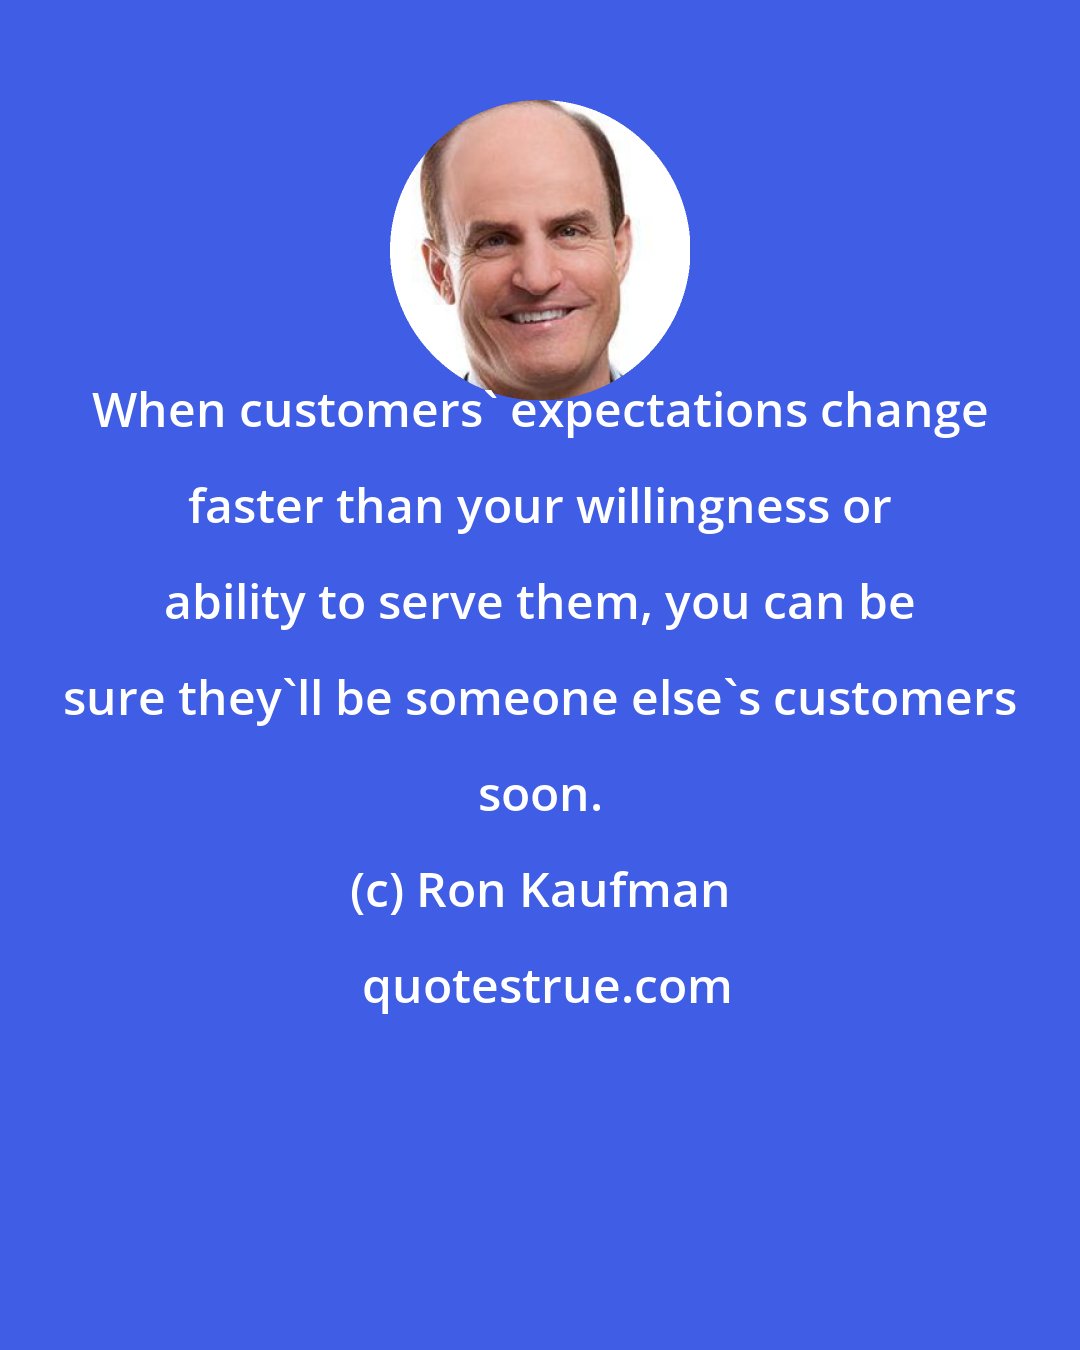 Ron Kaufman: When customers' expectations change faster than your willingness or ability to serve them, you can be sure they'll be someone else's customers soon.